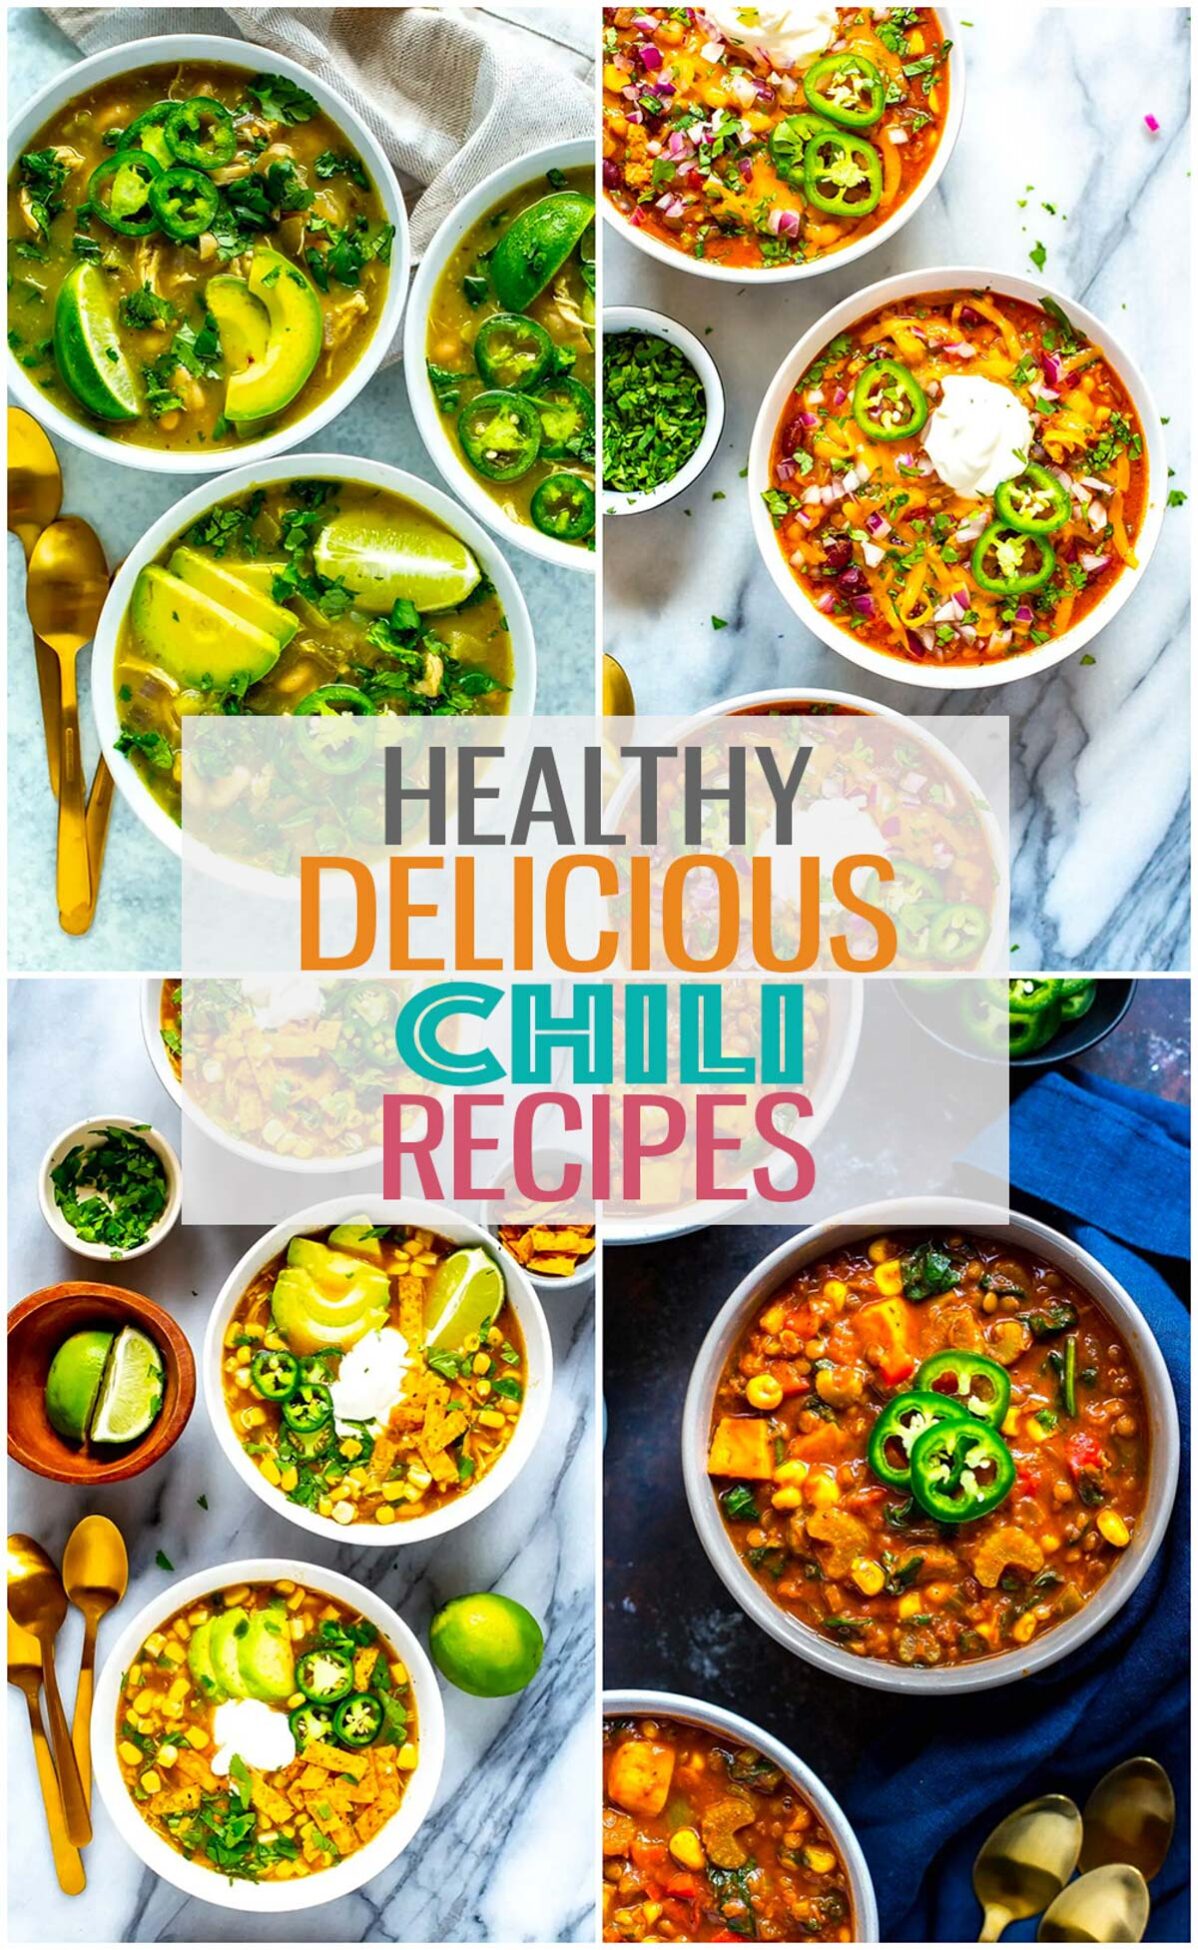 Collage of four different chili recipes with the text "Healthy Delicious Chili Recipes" layered over top.